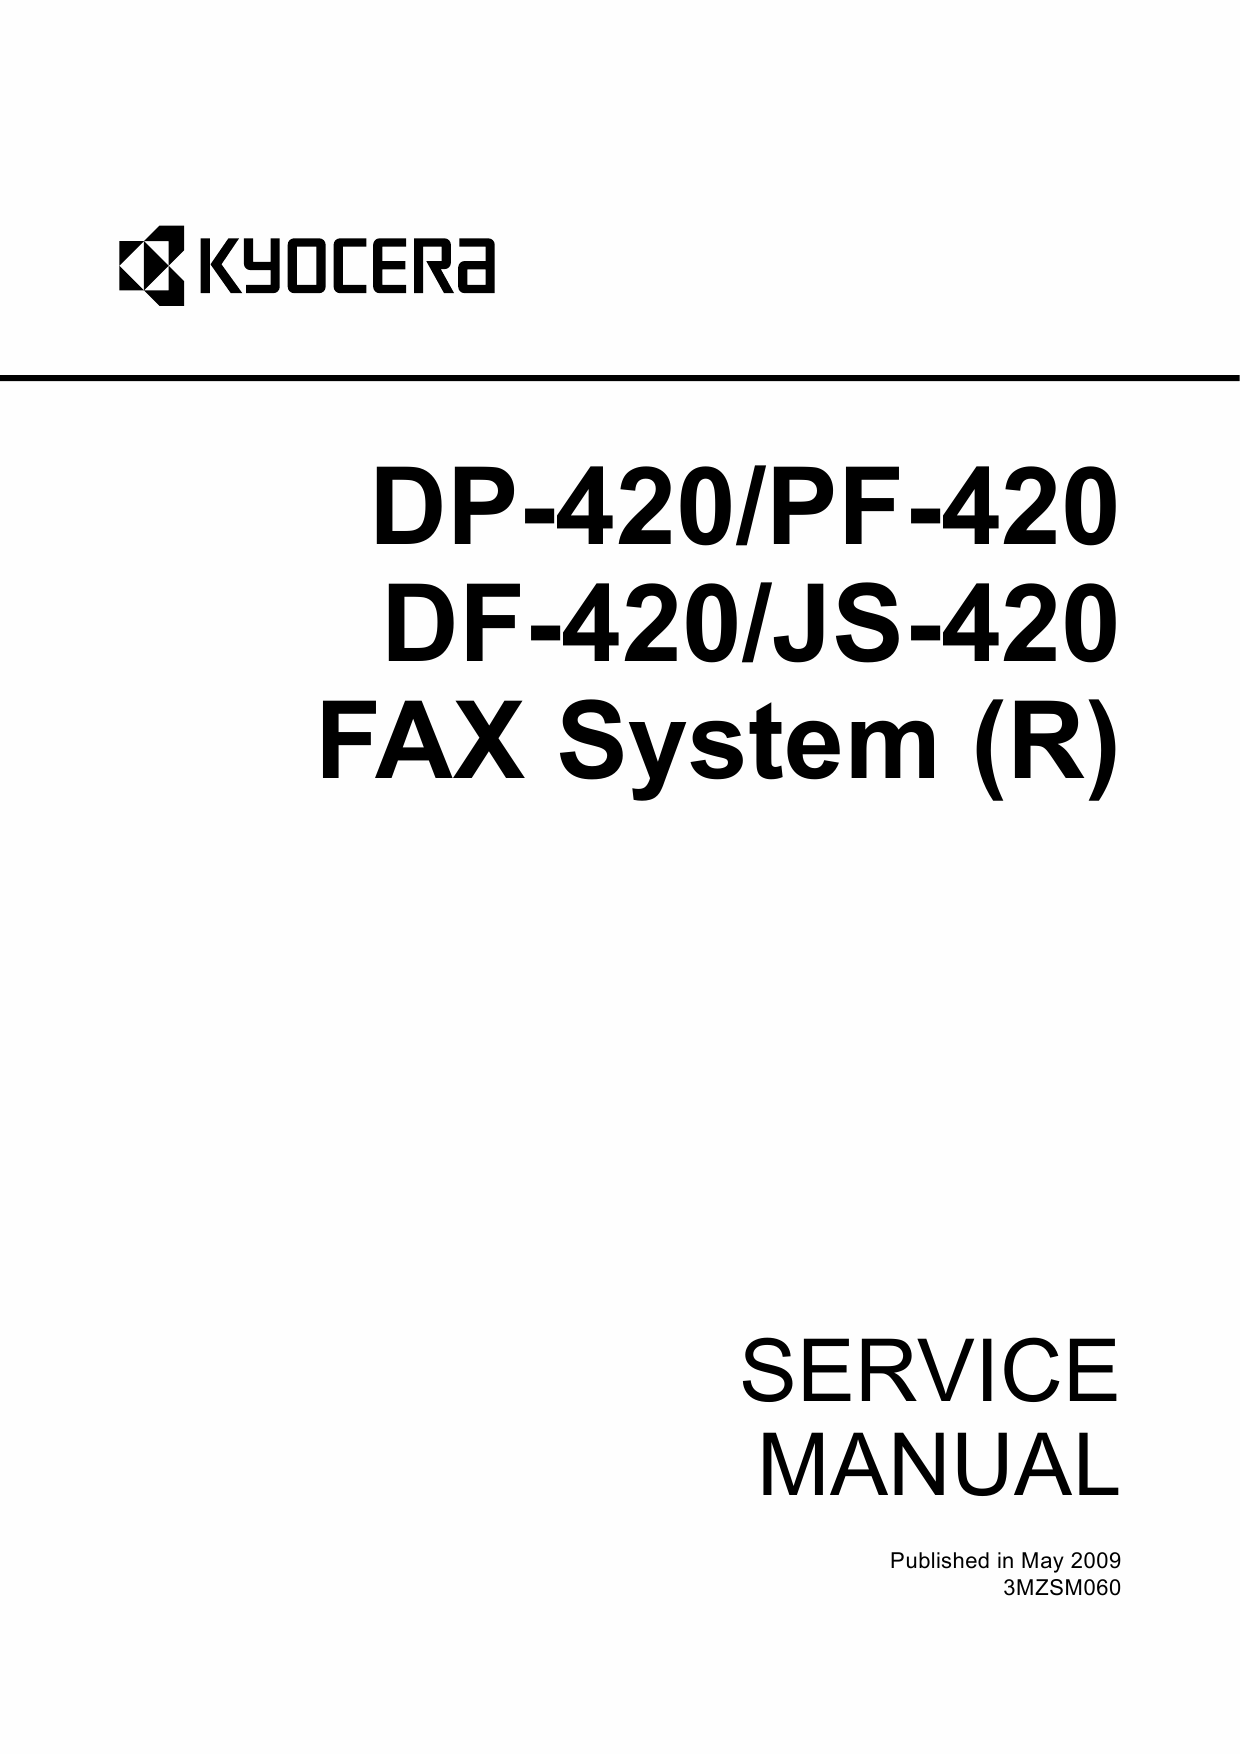 KYOCERA Options DP-420 PF-420 DF-420 JS-420 Fax-System-R Parts and Service Manual-1